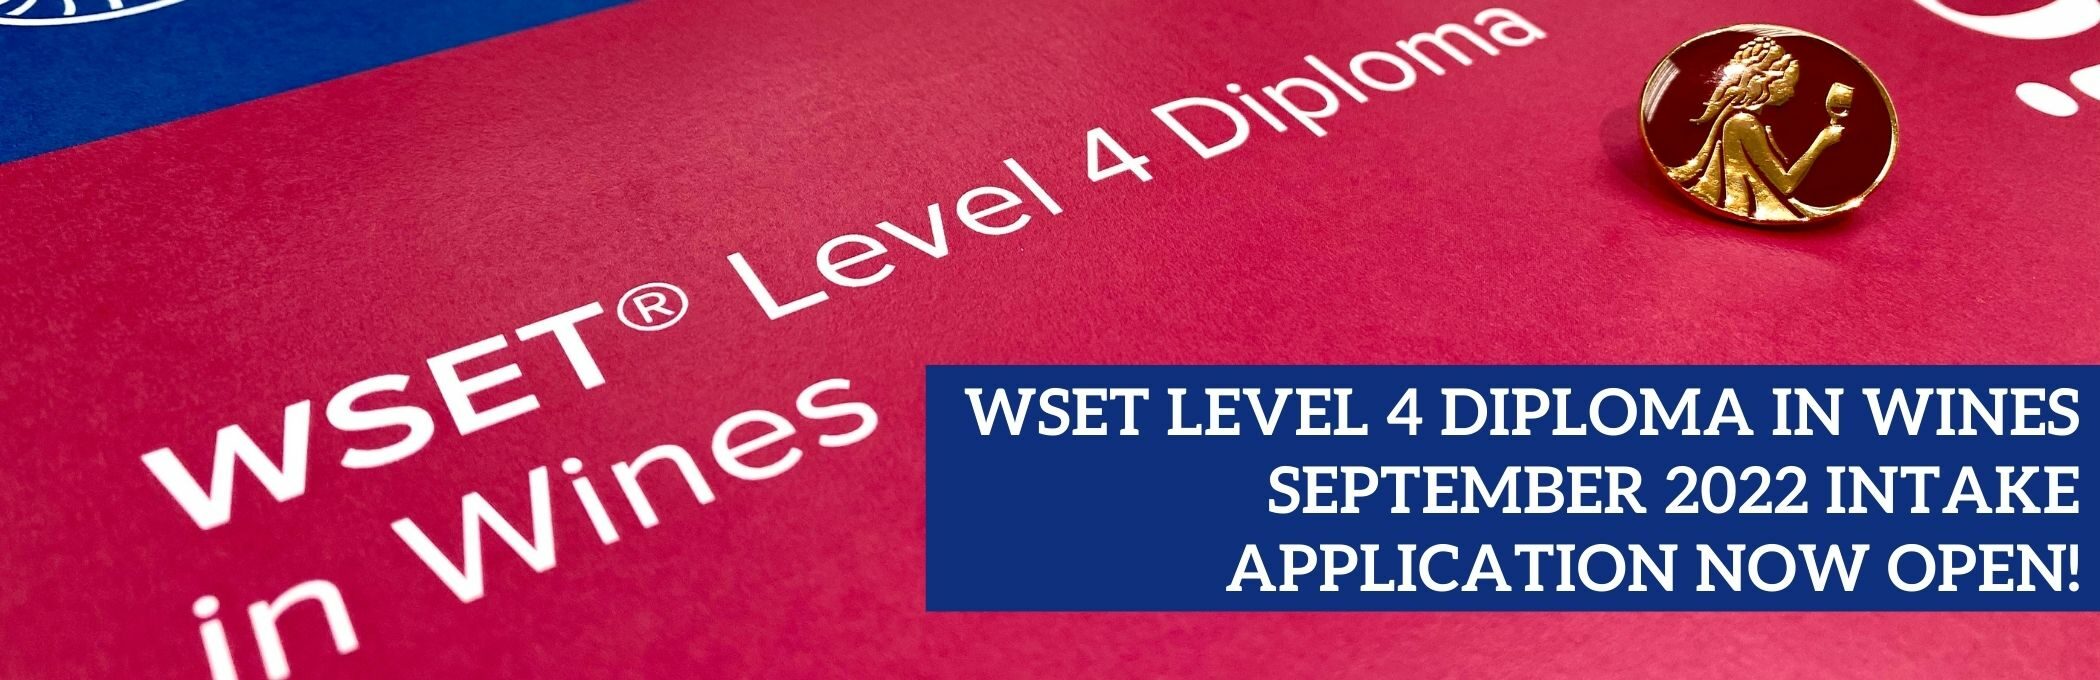 WSET Level 4 Diploma in Wines September 2022 Intake Application Now Open!